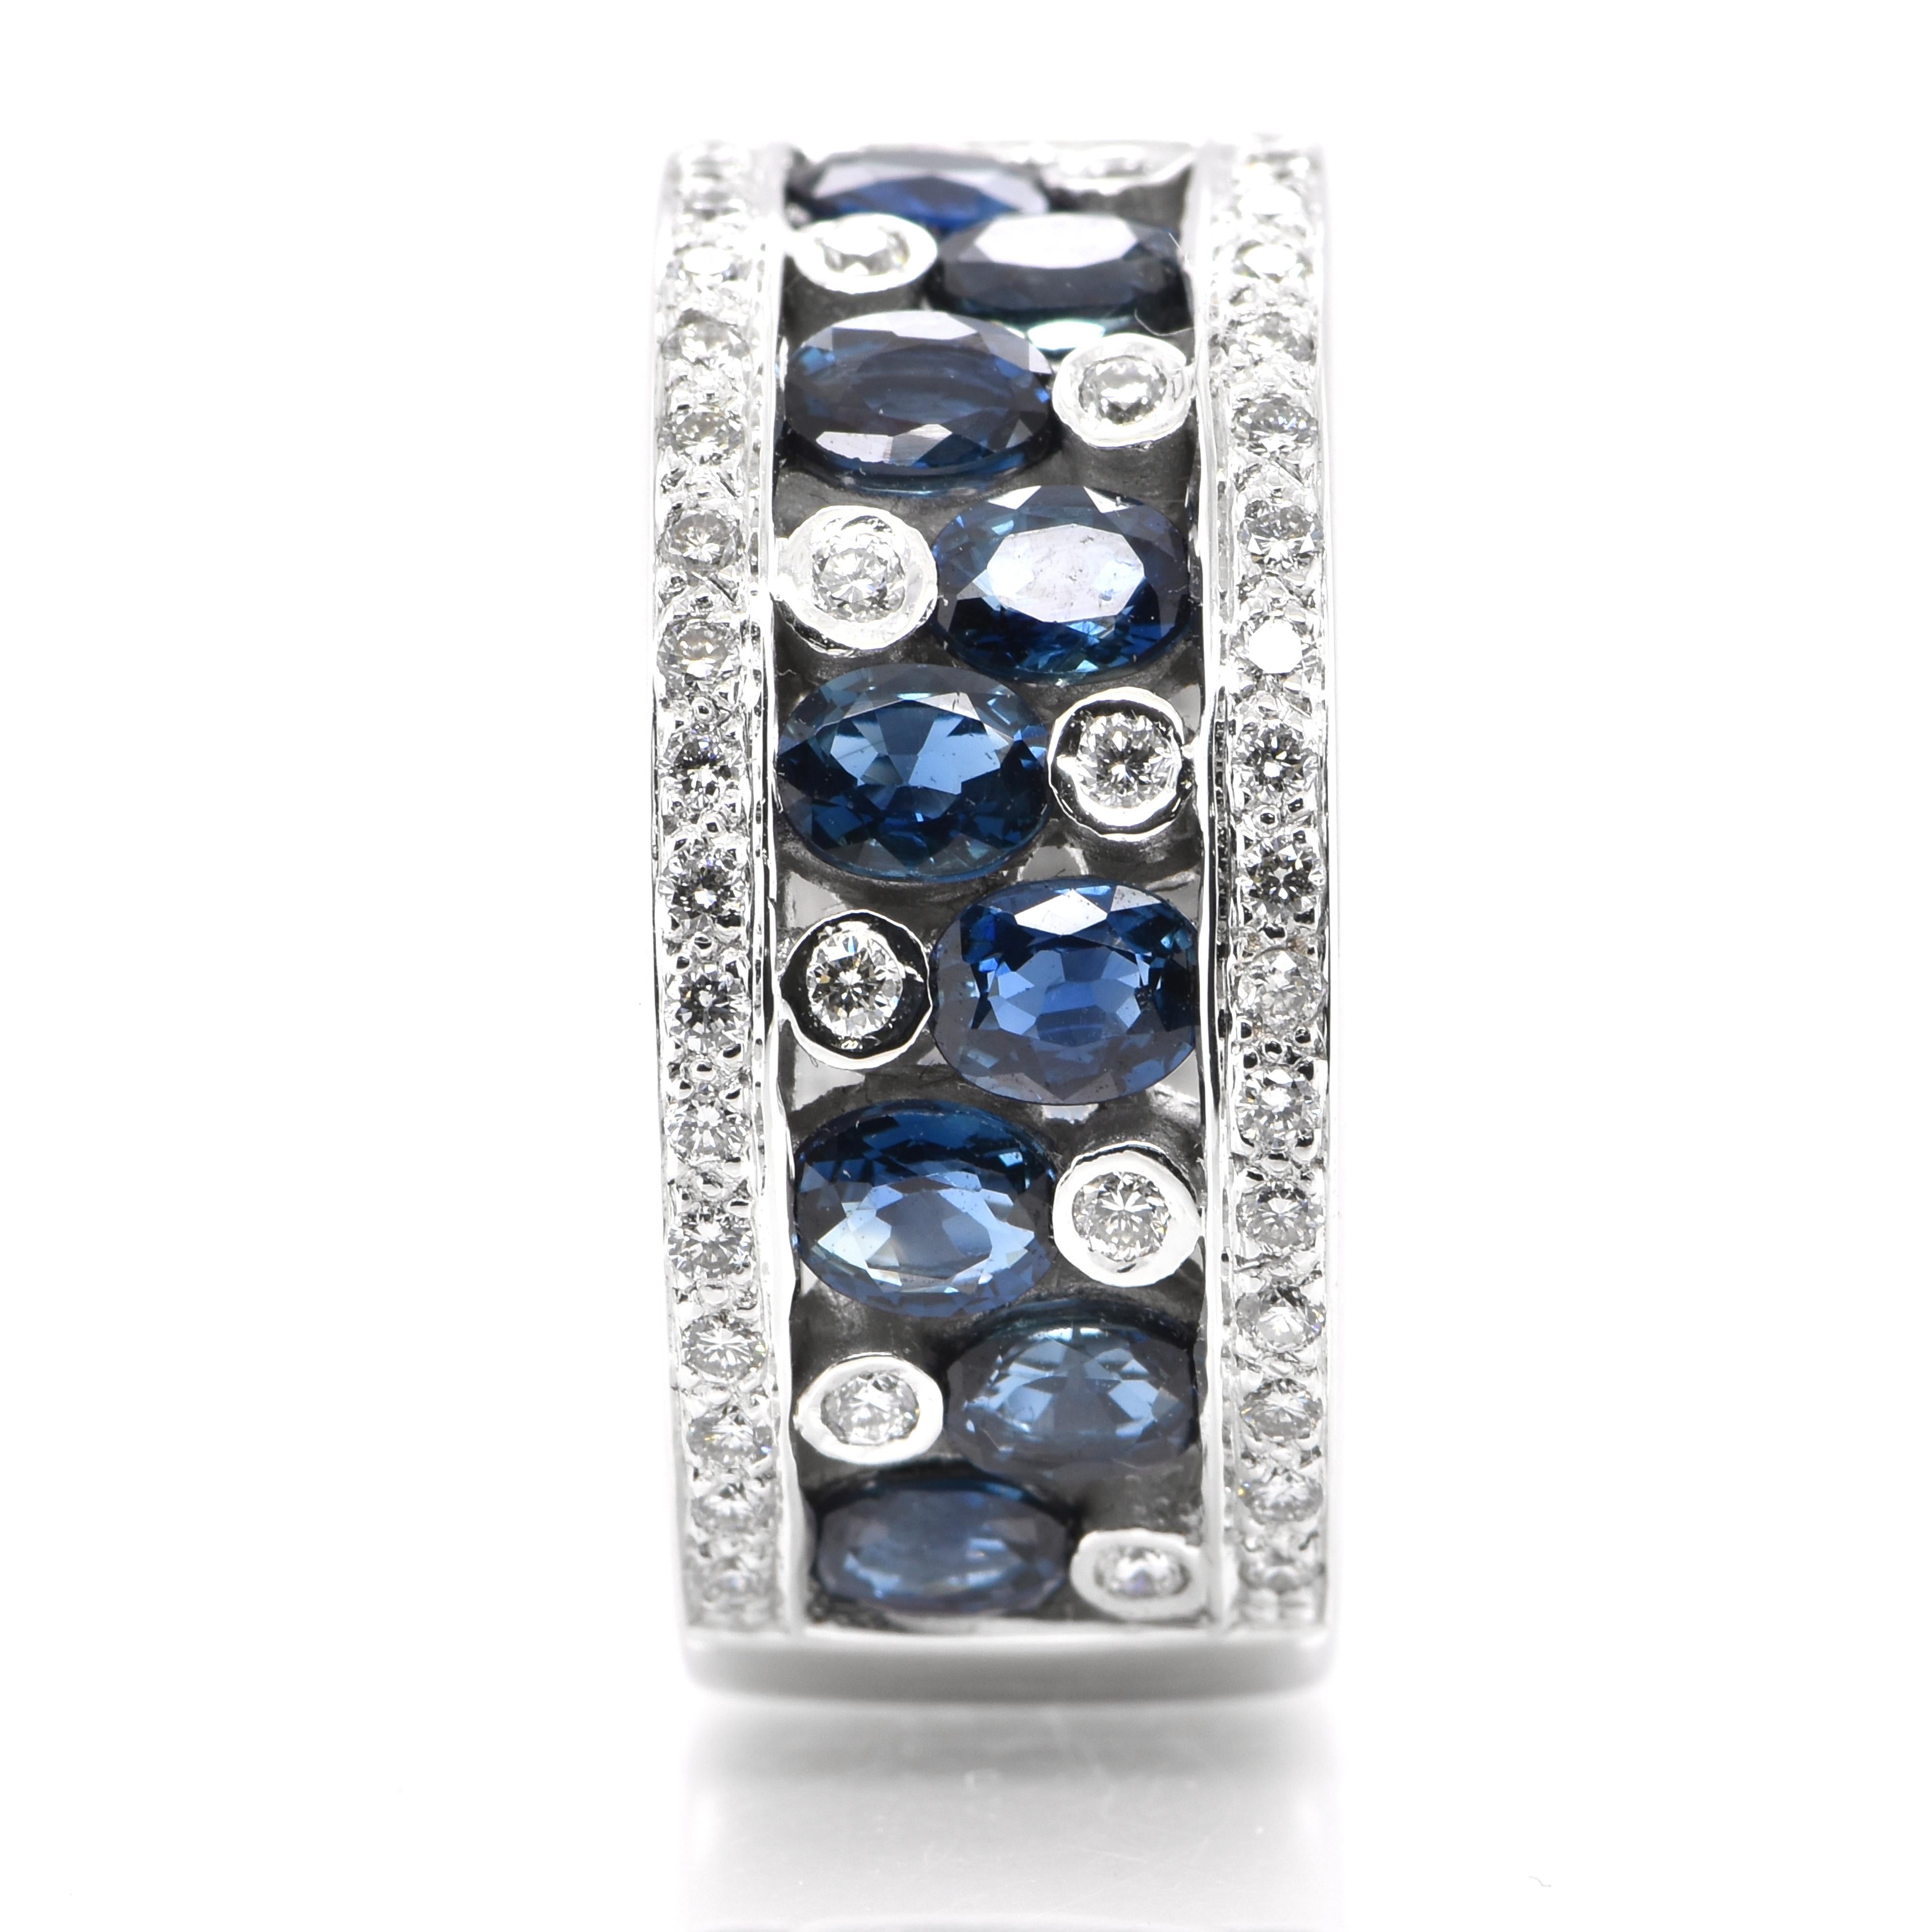 A beautiful half eternity band ring featuring 2.30 Carats Natural Princess Cut Sapphires and 0.65 Carats Diamond Accents set in 18 Karat White Gold. Sapphires have extraordinary durability - they excel in hardness as well as toughness and durability